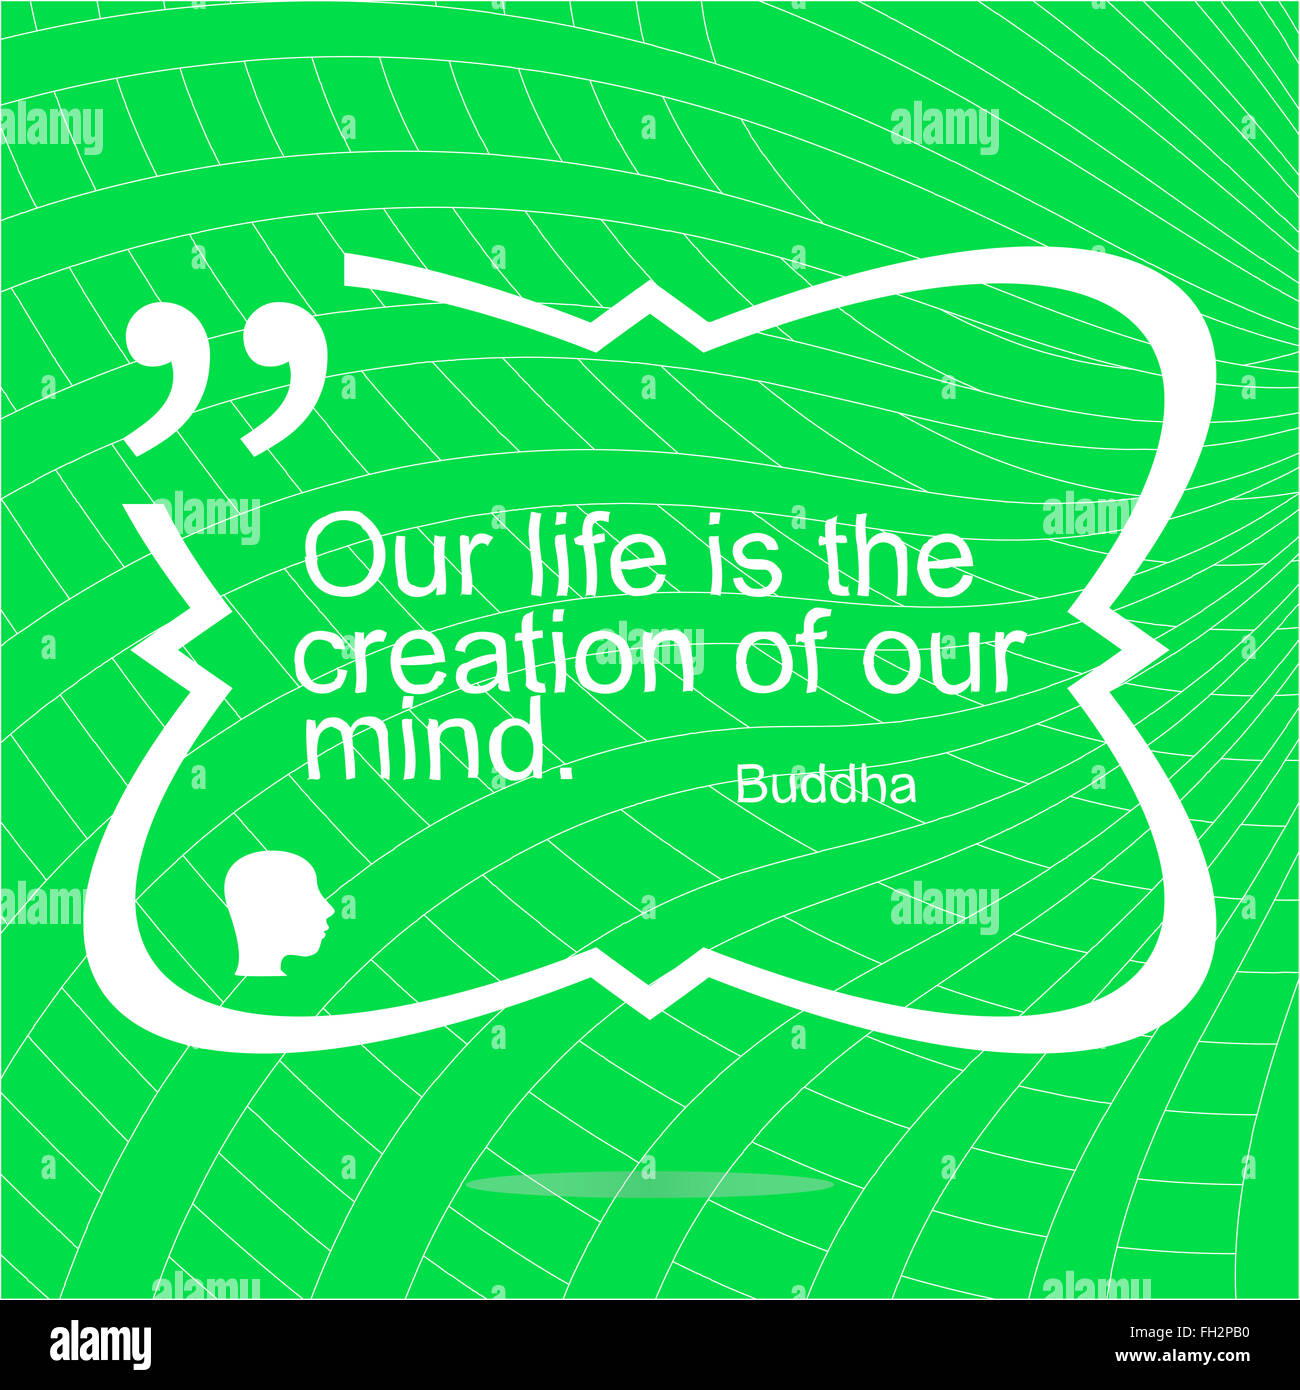 Our life is the creation of our mind. Inspirational motivational quote. Simple trendy design. Positive quote Stock Photo